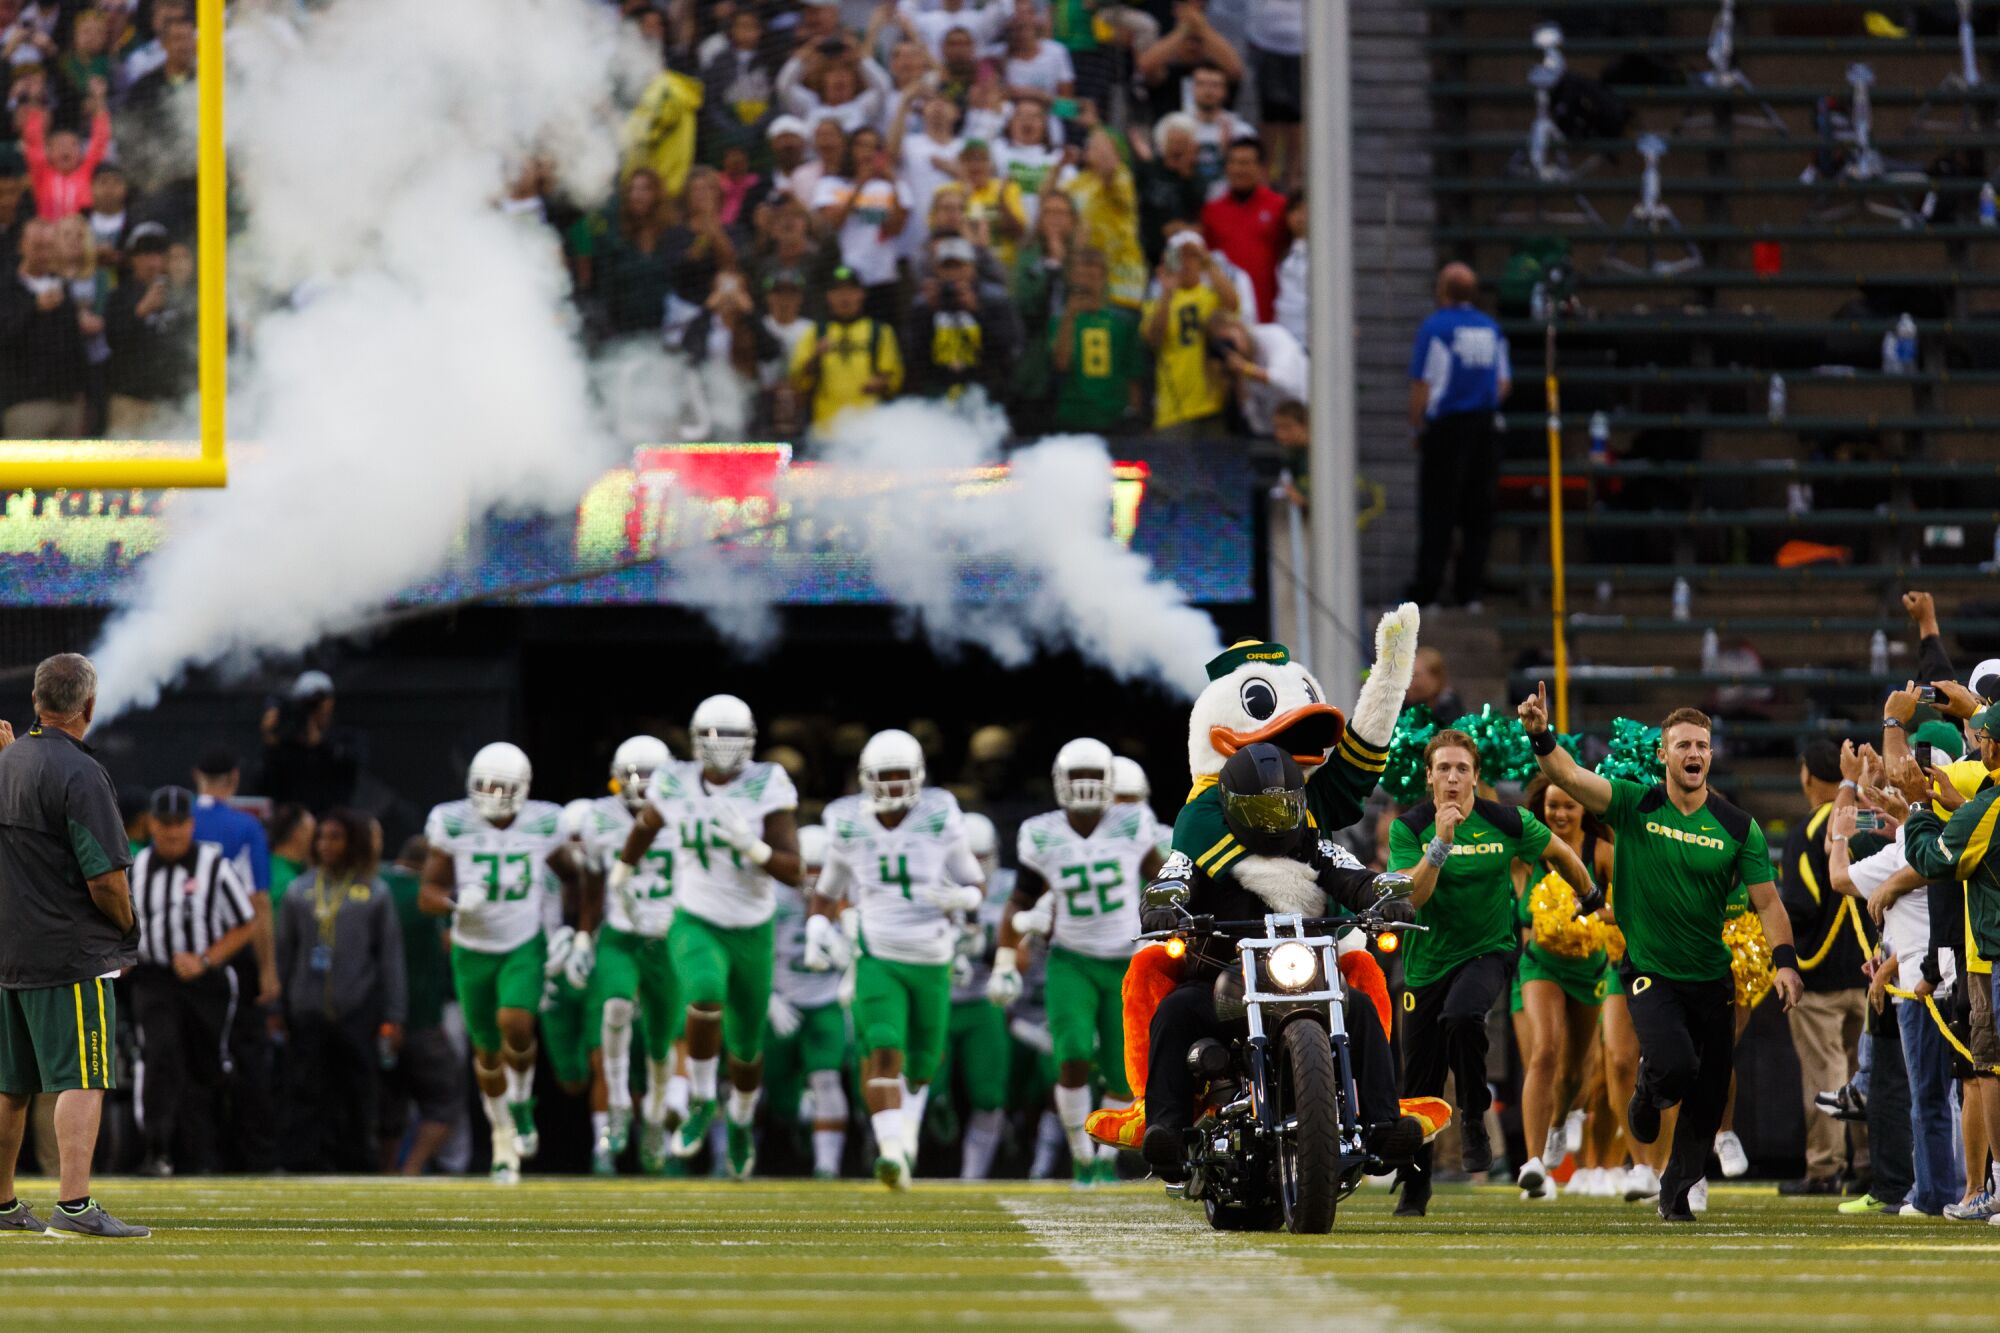 The University of Oregon football team runs out of the tunnel.